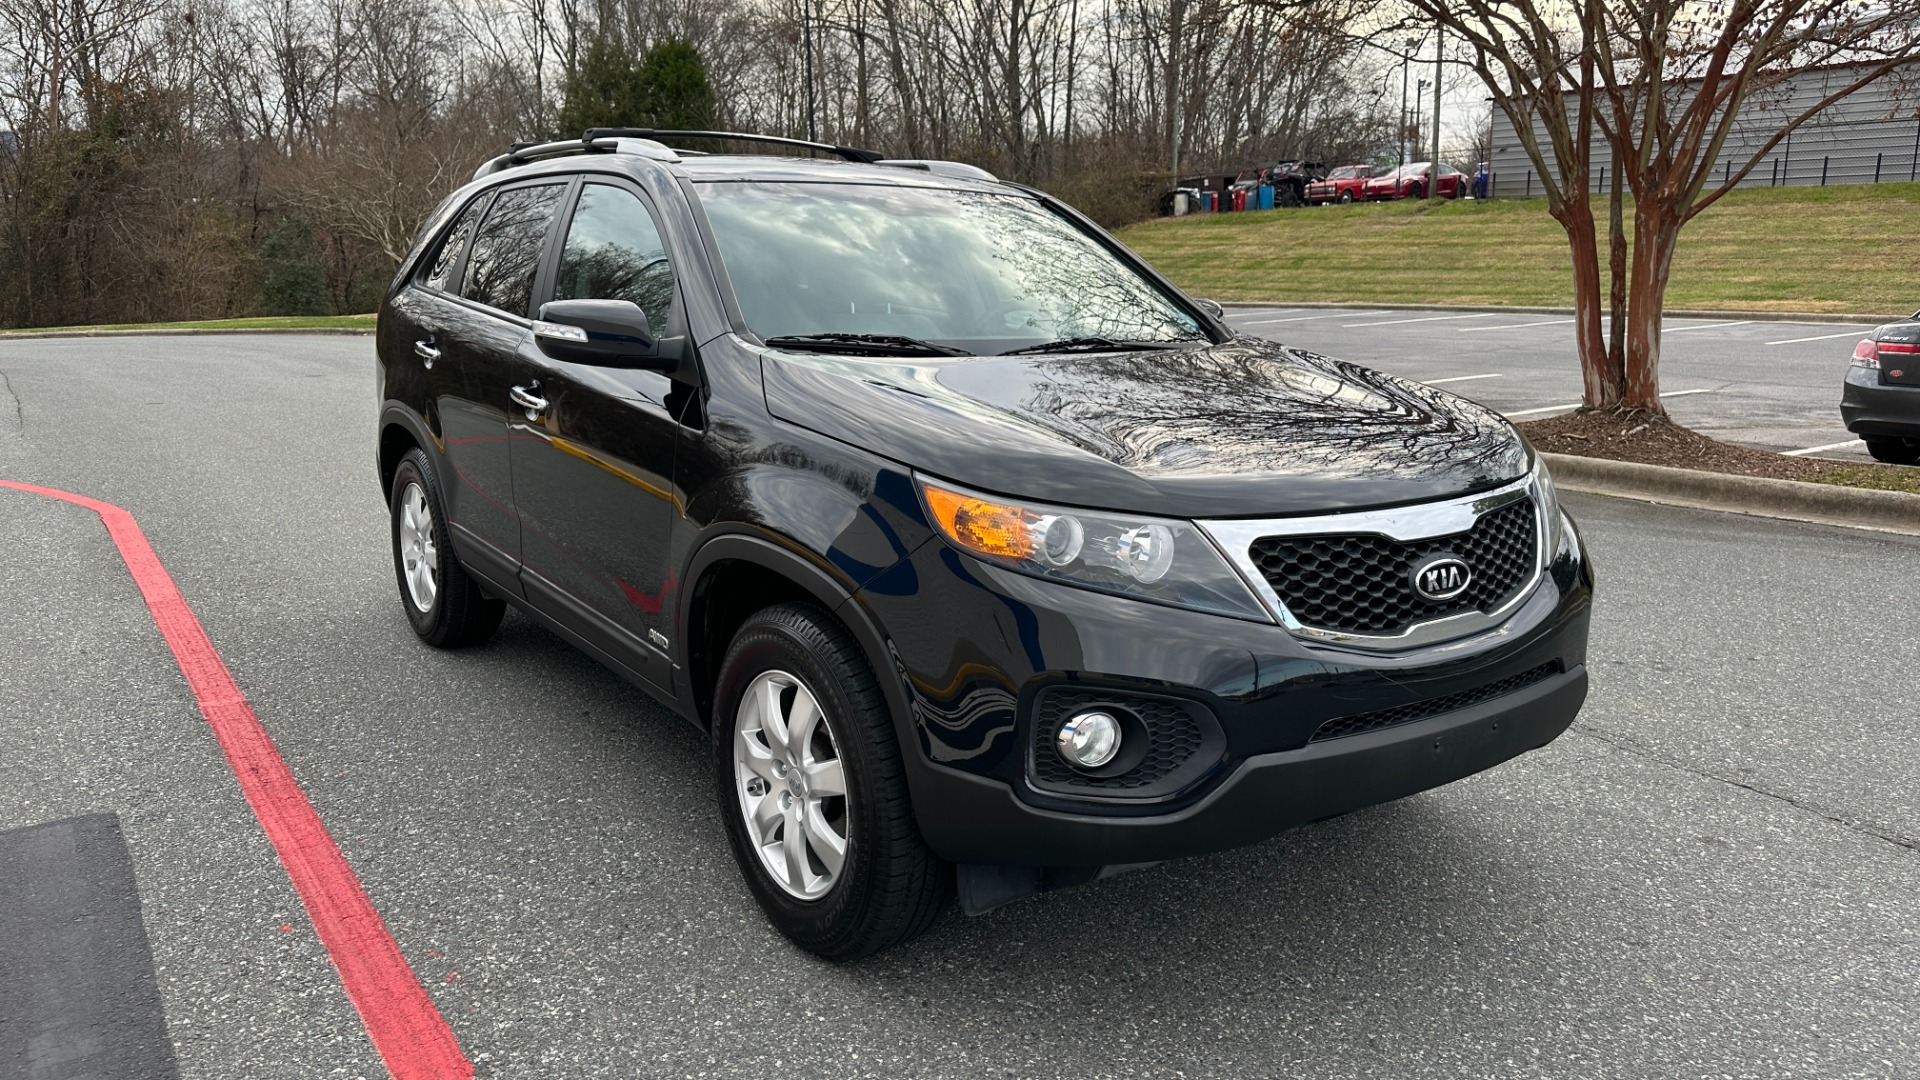 Used 2013 Kia Sorento LX / CONVENIENCE / AWD / 4CYL / CLOTH INTERIOR / ROOF RACK for sale $9,395 at Formula Imports in Charlotte NC 28227 2